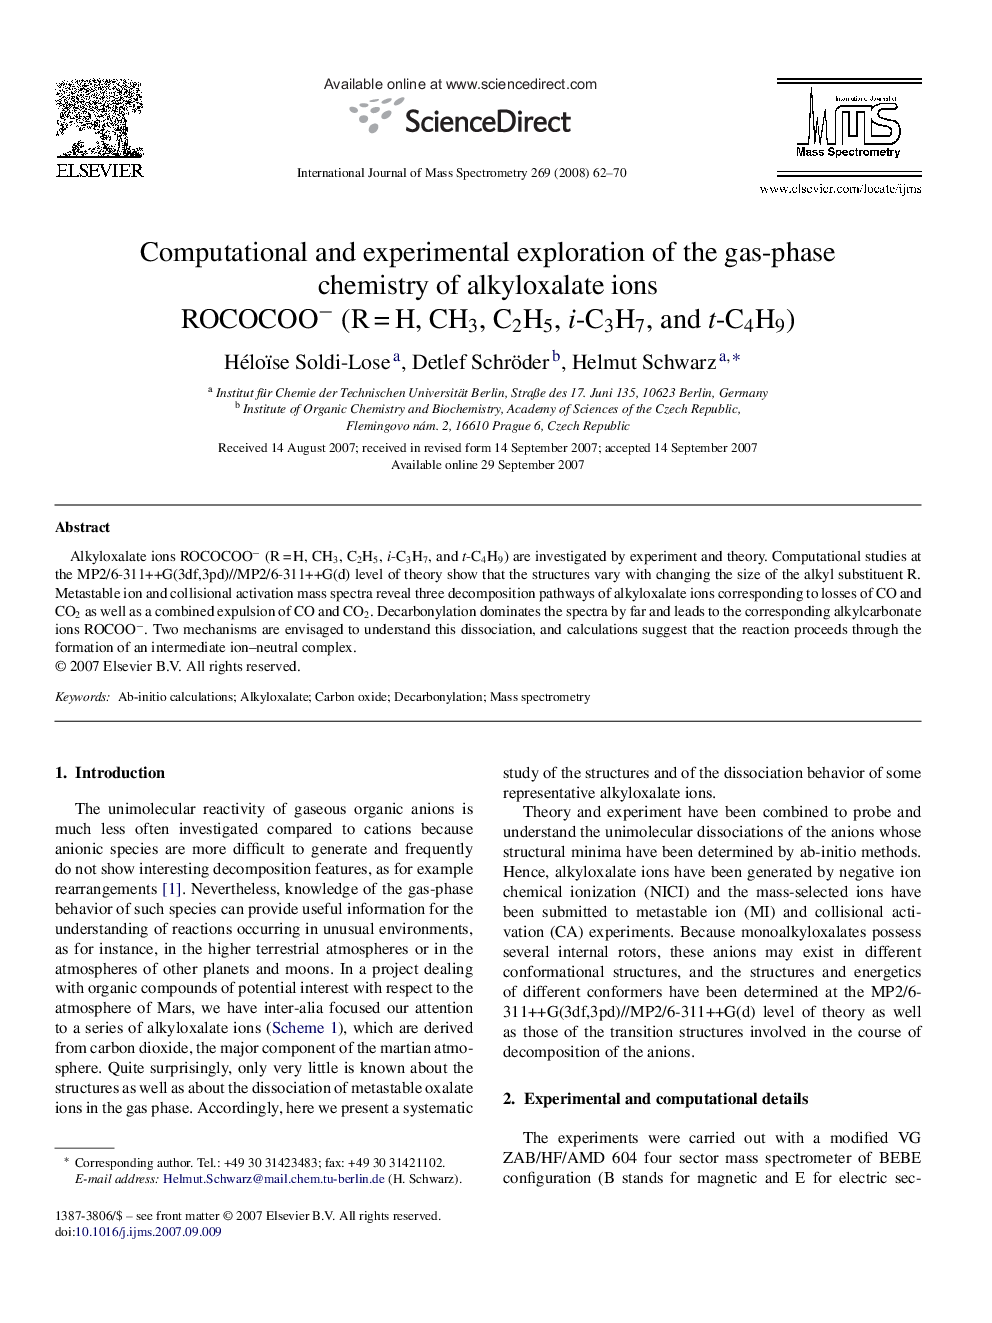 Computational and experimental exploration of the gas-phase chemistry of alkyloxalate ions ROCOCOOâ (RÂ =Â H, CH3, C2H5, i-C3H7, and t-C4H9)